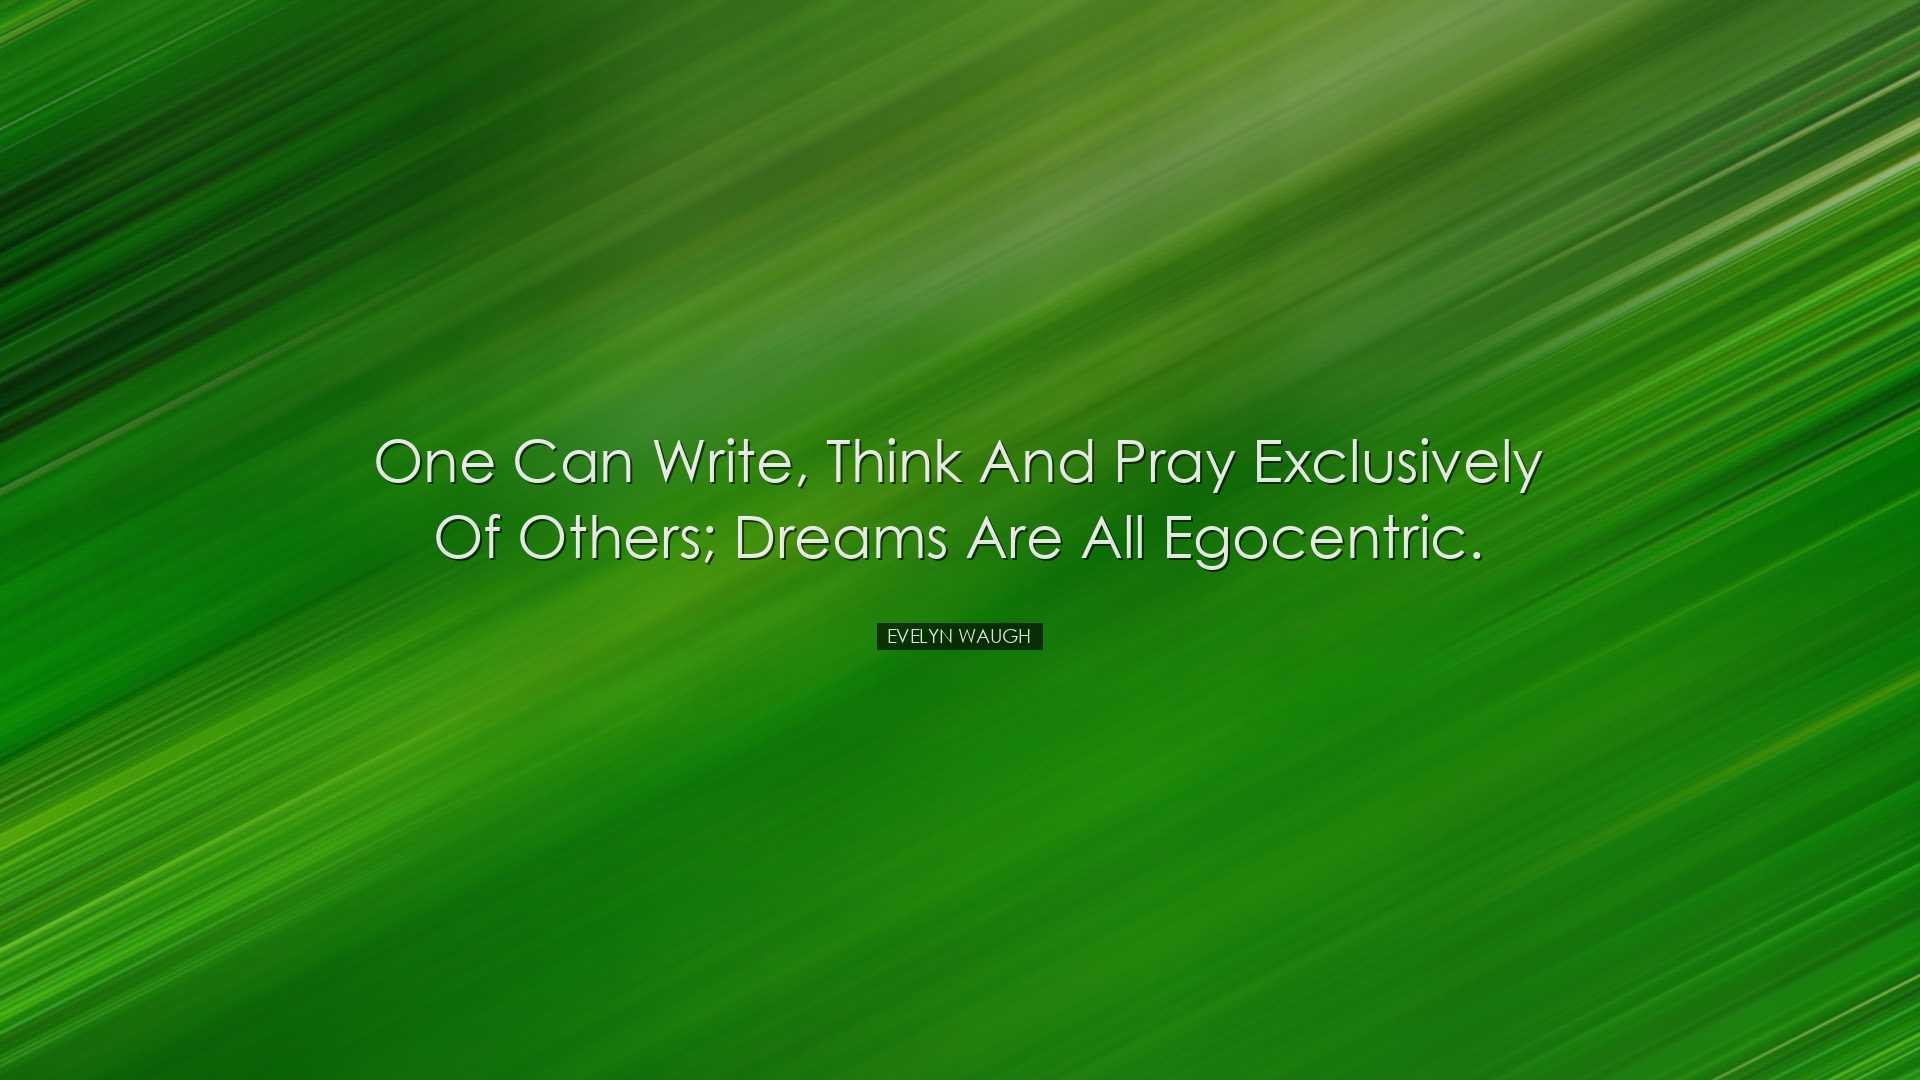 One can write, think and pray exclusively of others; dreams are al